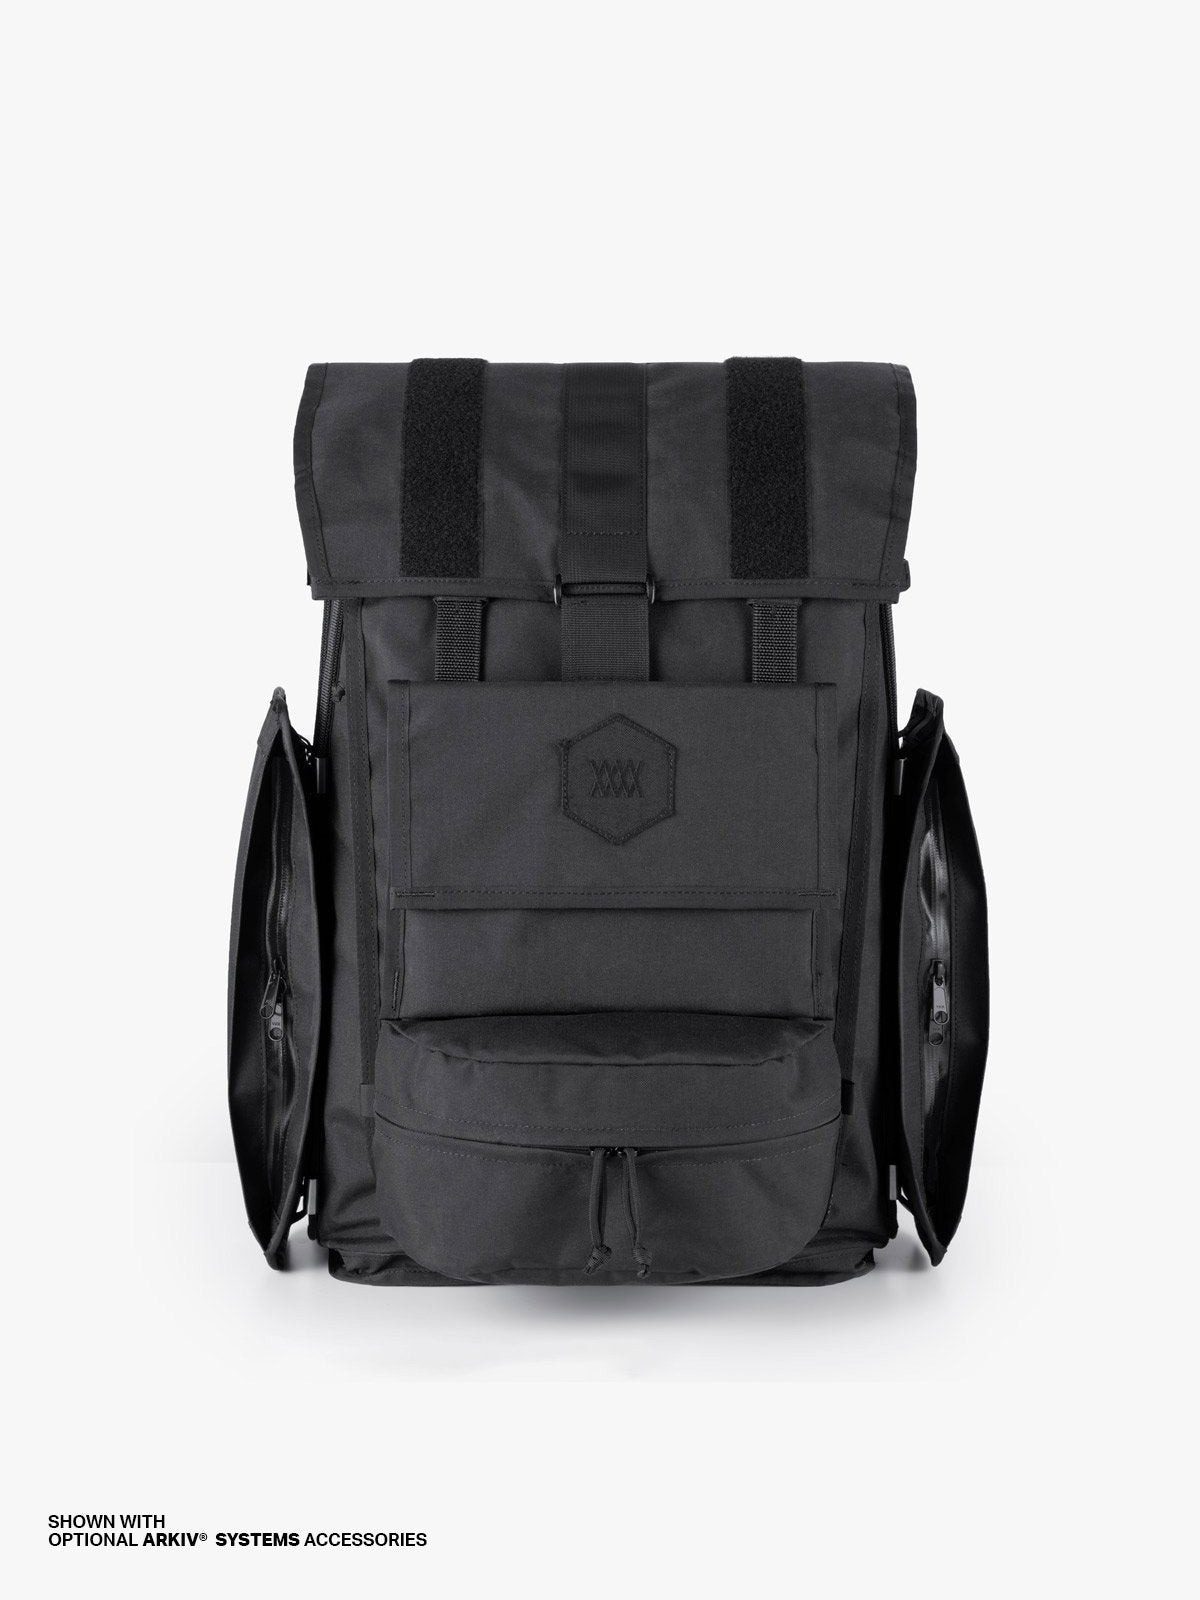 Radian by Mission Workshop - Weatherproof Bags & Technical Apparel - San Francisco & Los Angeles - Built to endure - Guaranteed forever